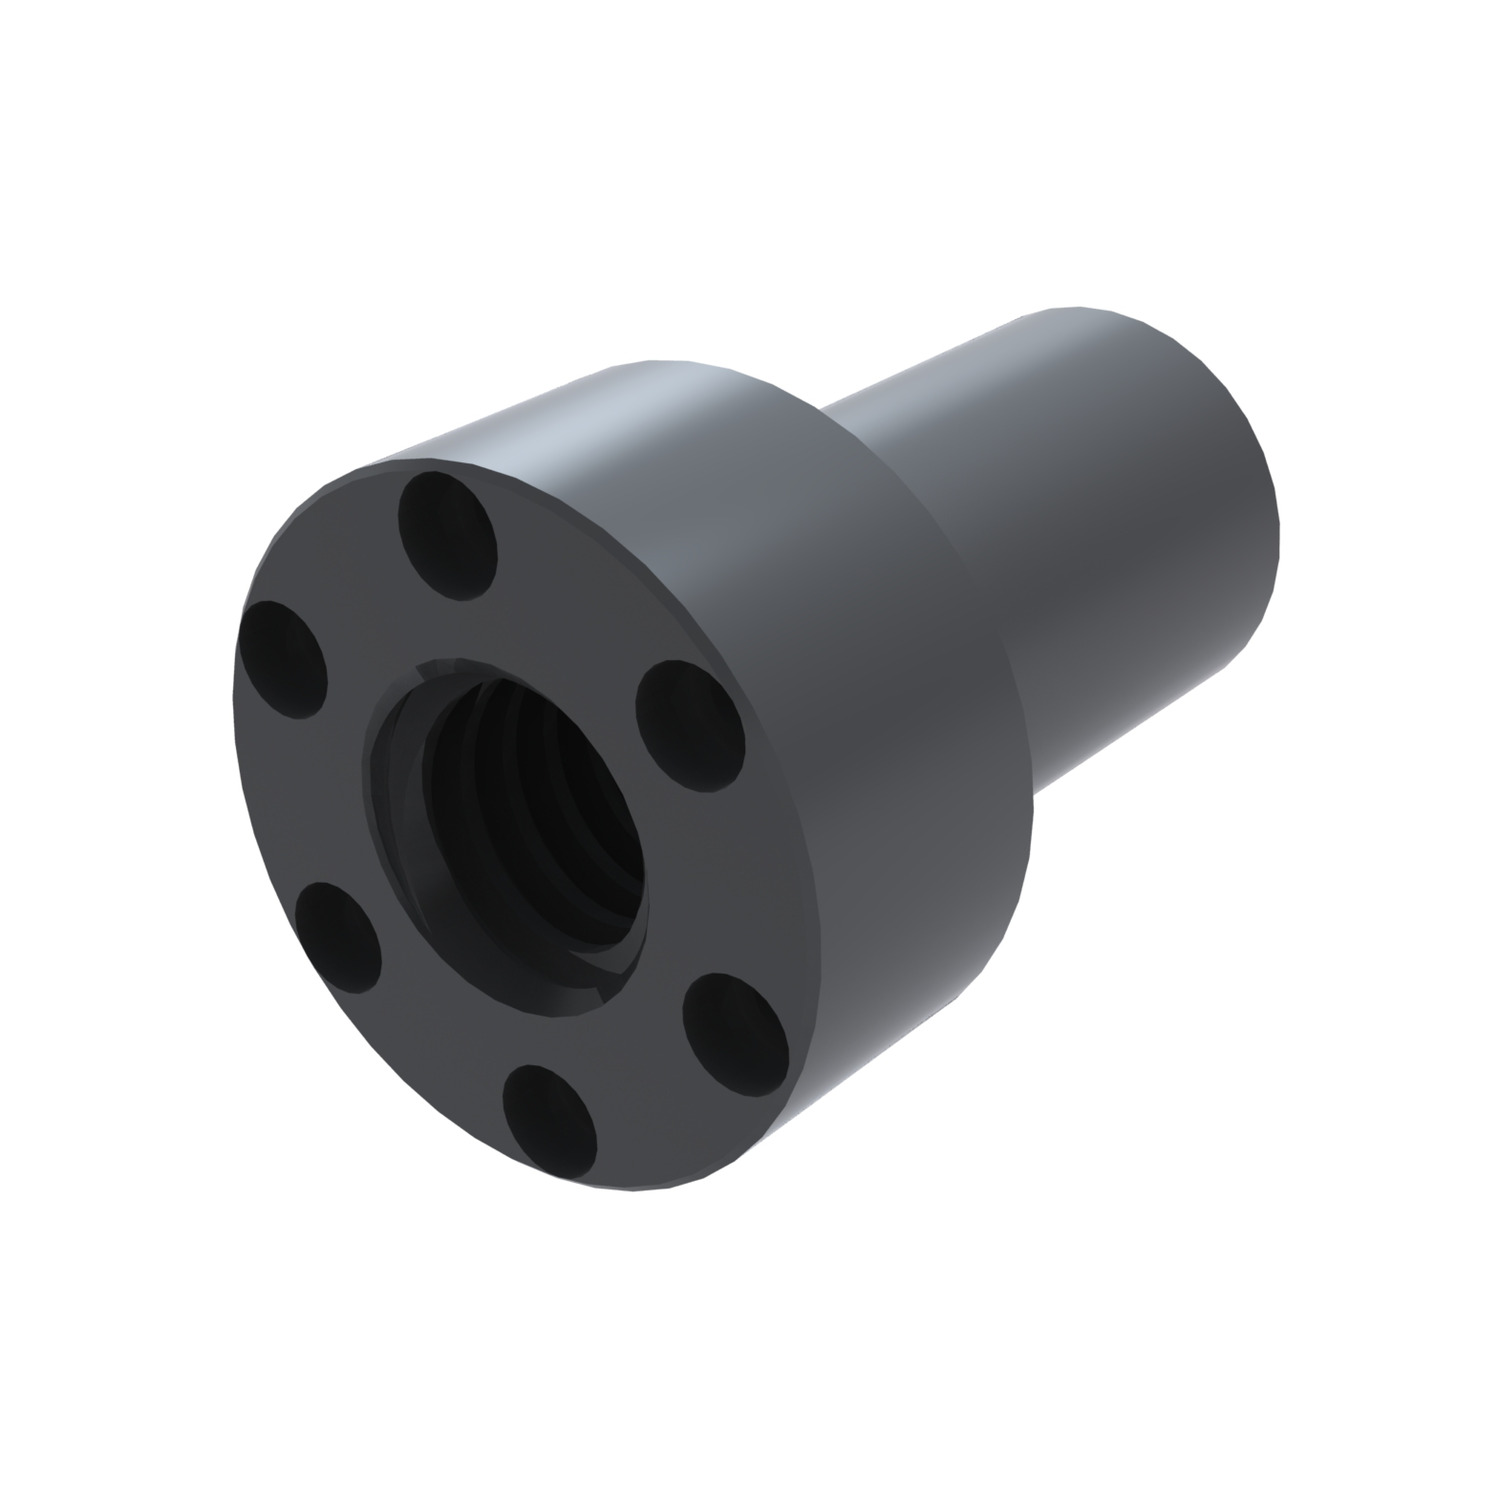 Product L1342, Flanged Self-Lubricating Plastic Nut for lead screws / 